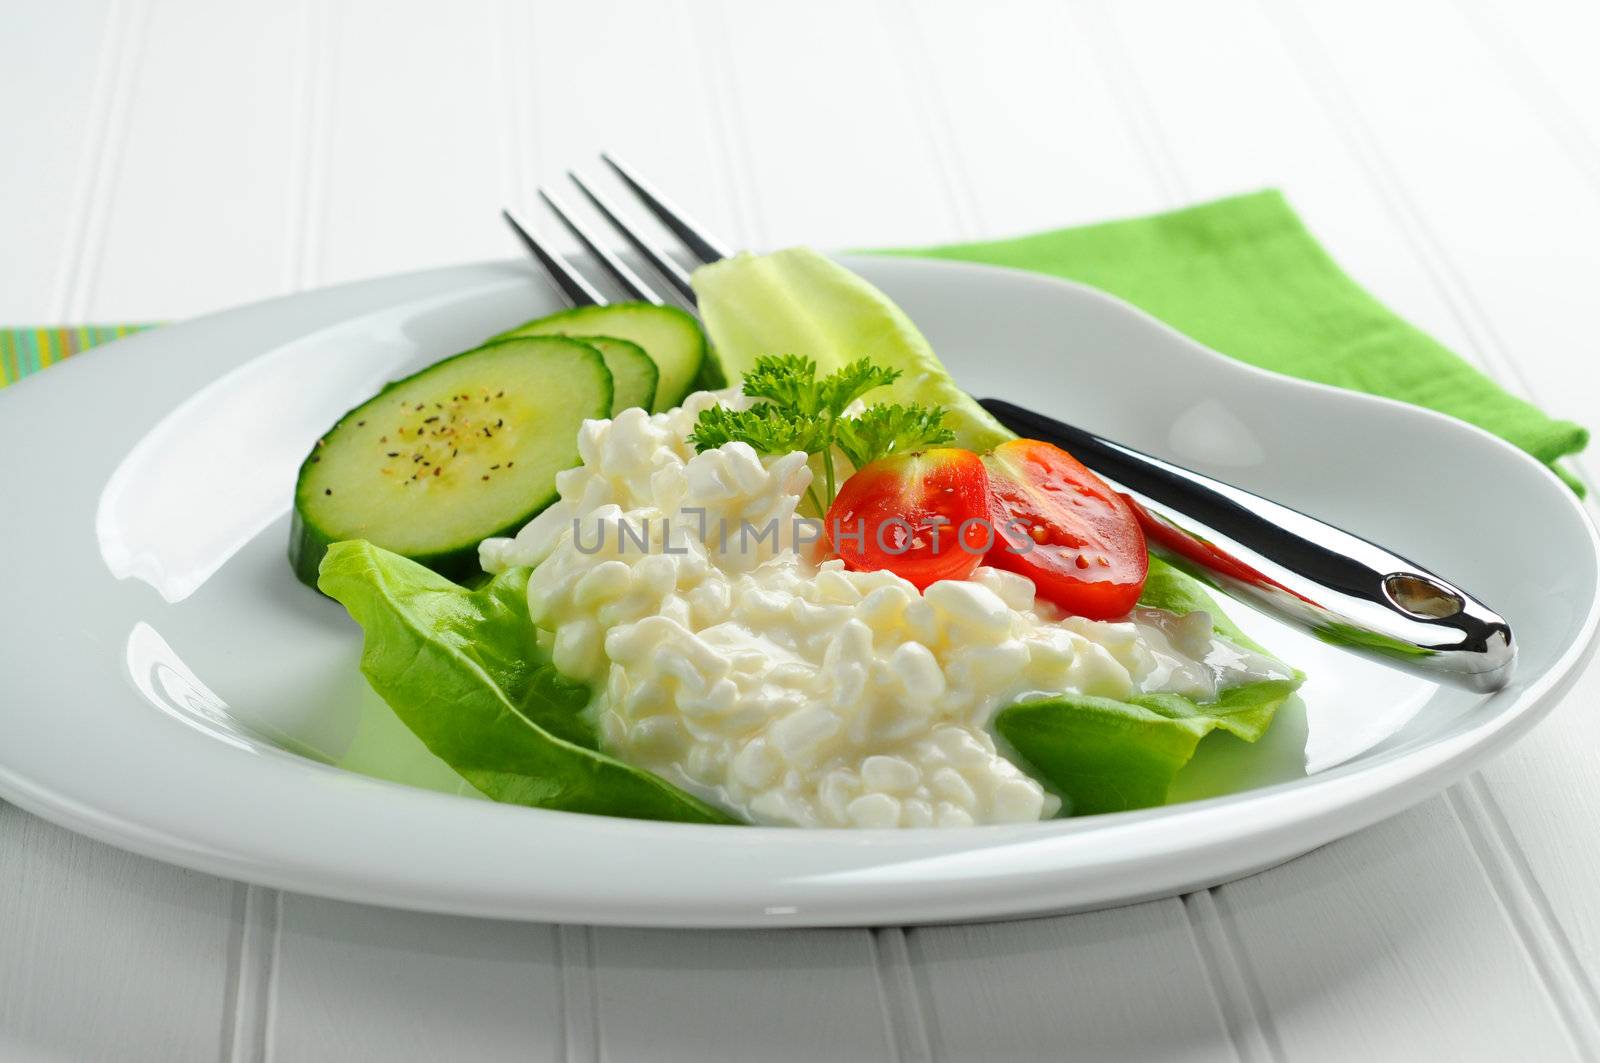 Plate with cottage cheese and fresh vegetables.